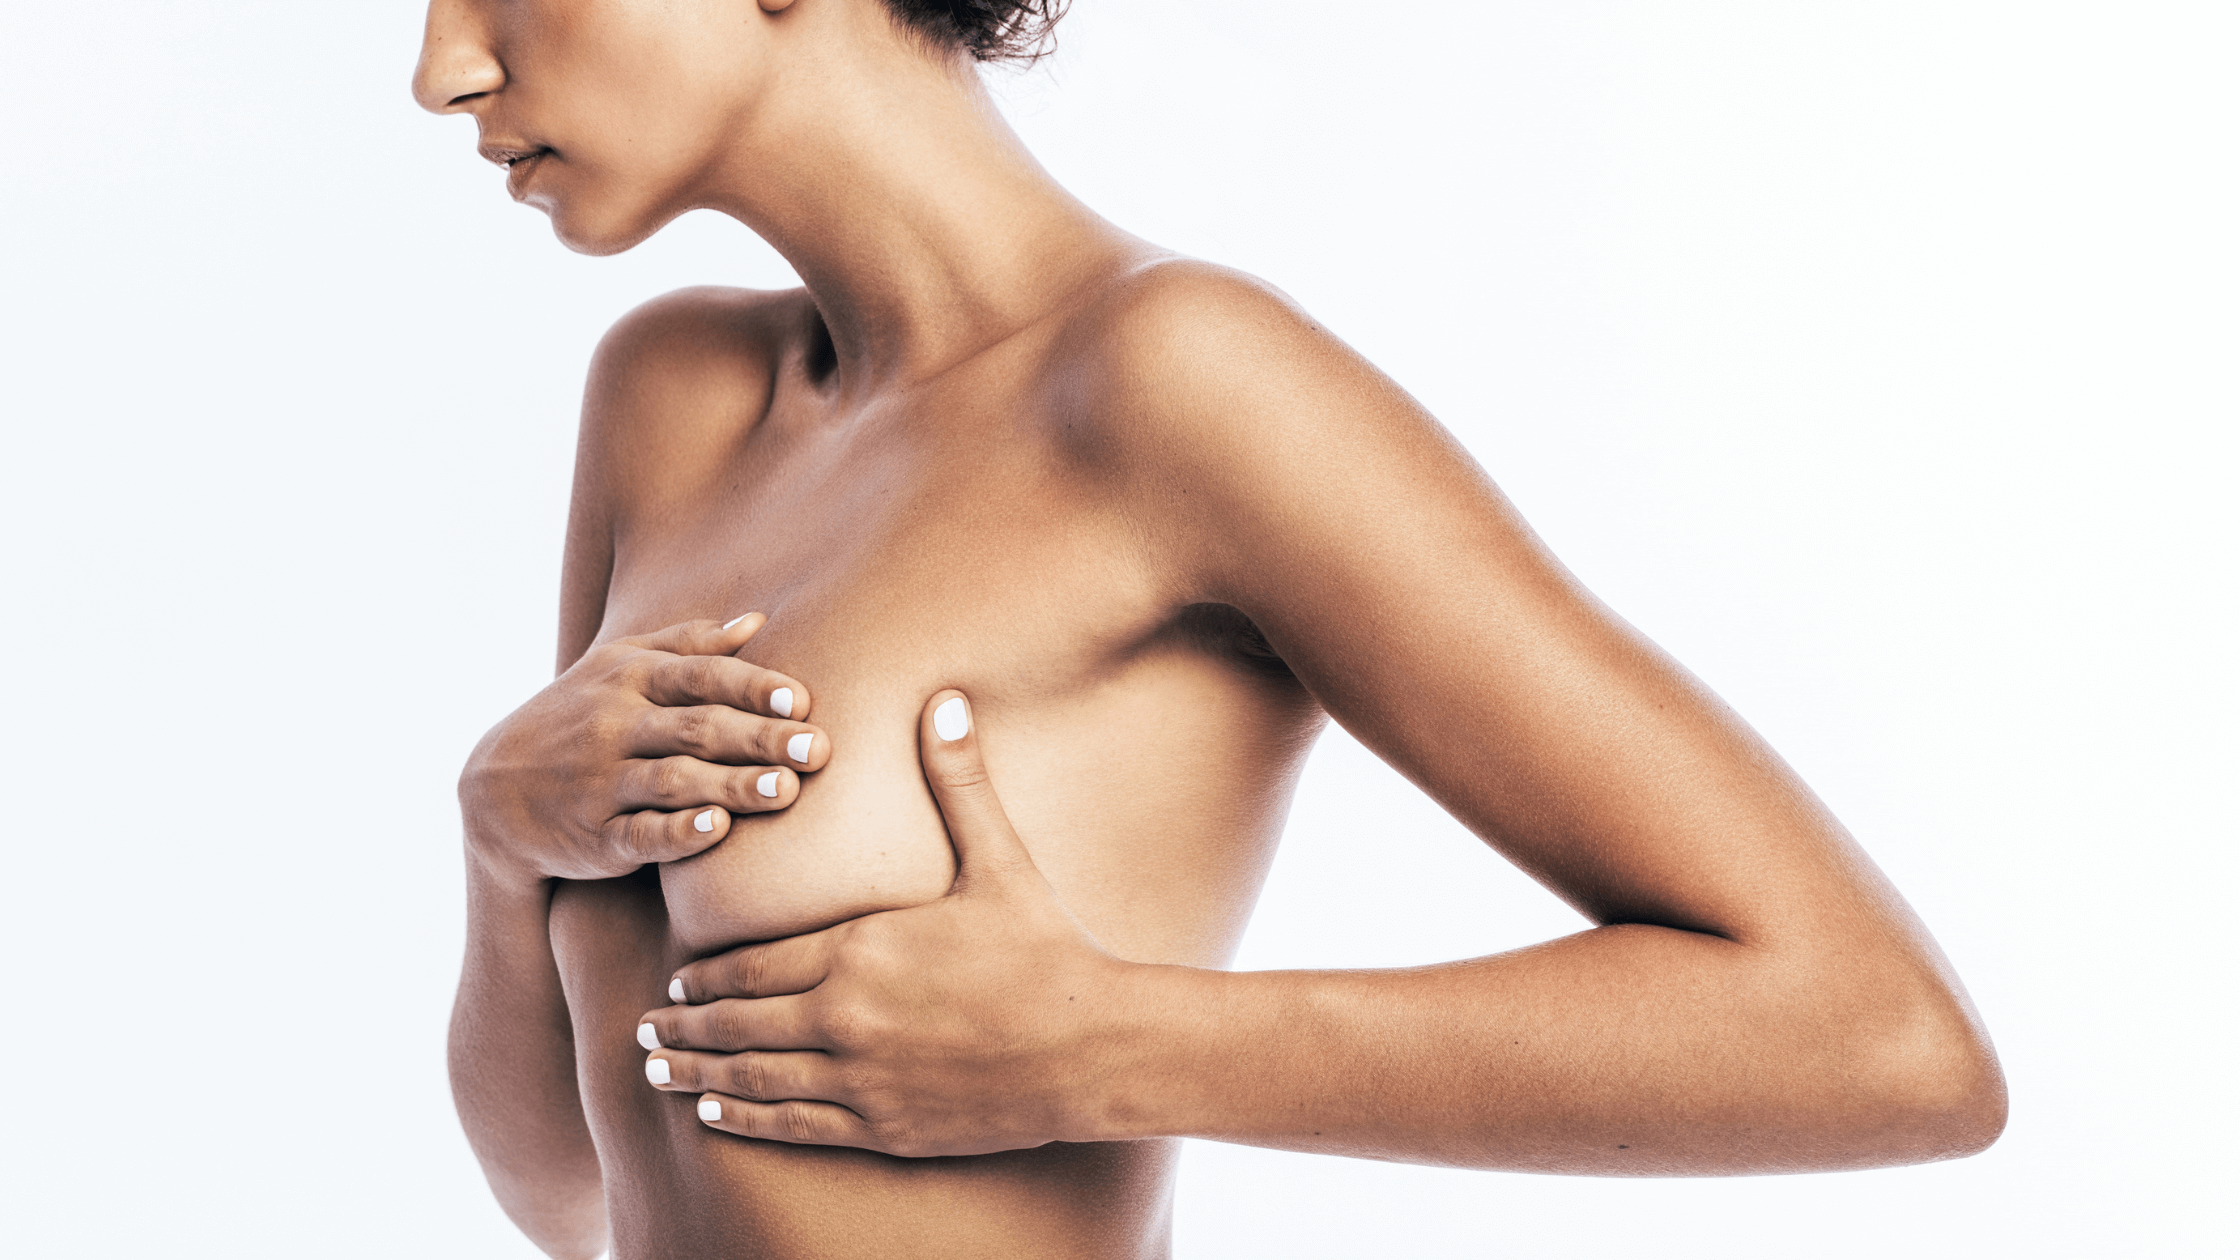 What are the Most Effective Breast Scar Ointments?